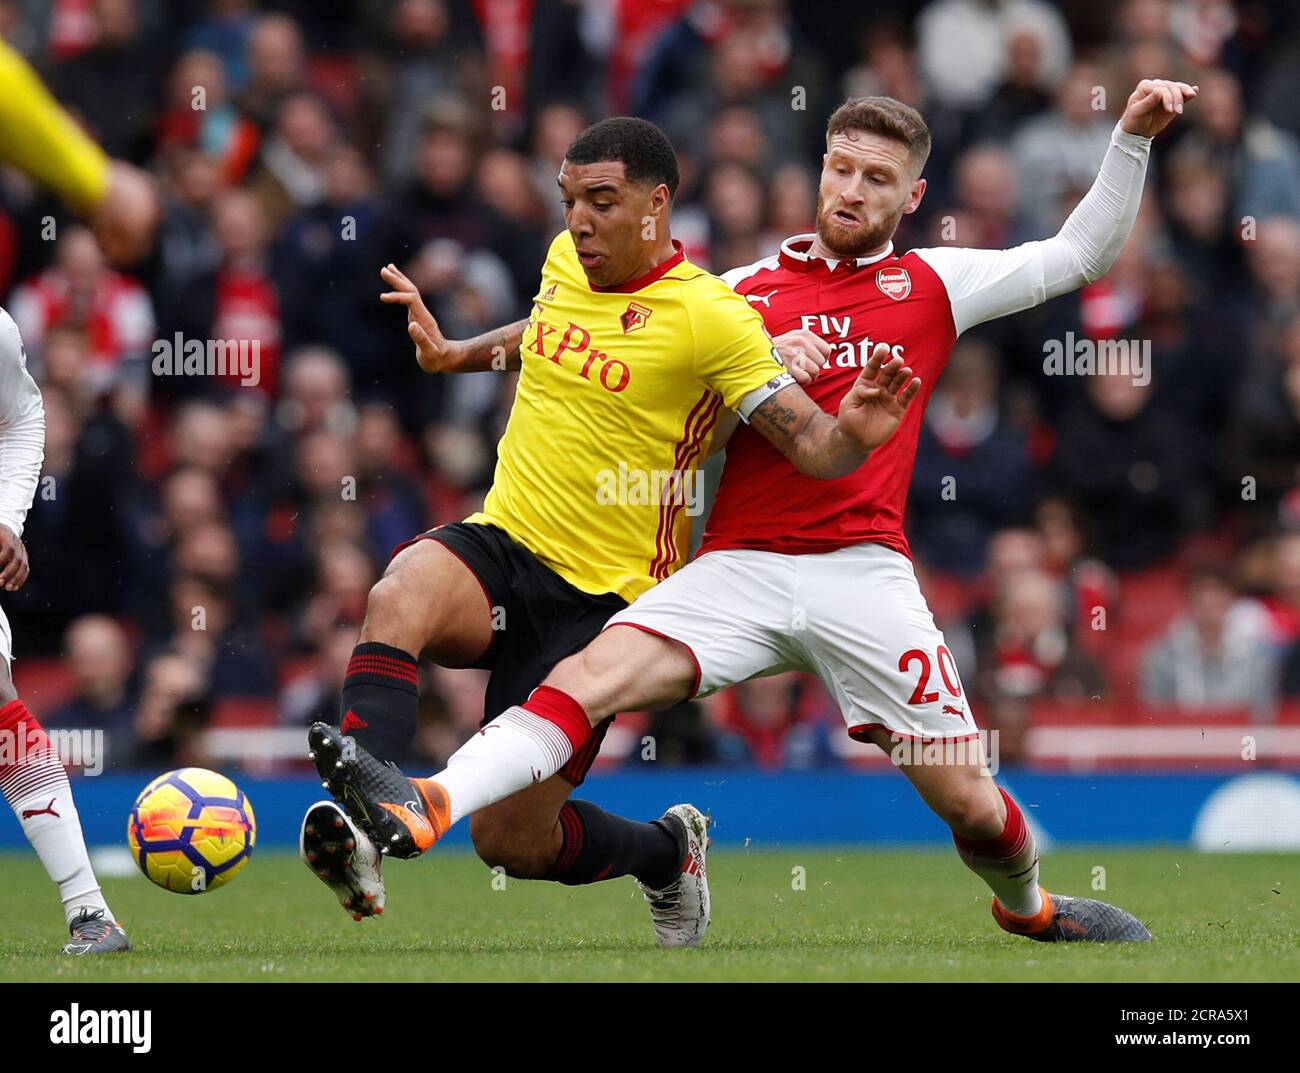 Soccer Football - Premier League - Arsenal vs Watford - Emirates Stadium, London, Britain - March 11, 2018   Watford's Troy Deeney in action with Arsenal's Shkodran Mustafi            REUTERS/Eddie Keogh    EDITORIAL USE ONLY. No use with unauthorized audio, video, data, fixture lists, club/league logos or "live" services. Online in-match use limited to 75 images, no video emulation. No use in betting, games or single club/league/player publications.  Please contact your account representative for further details. Stock Photo